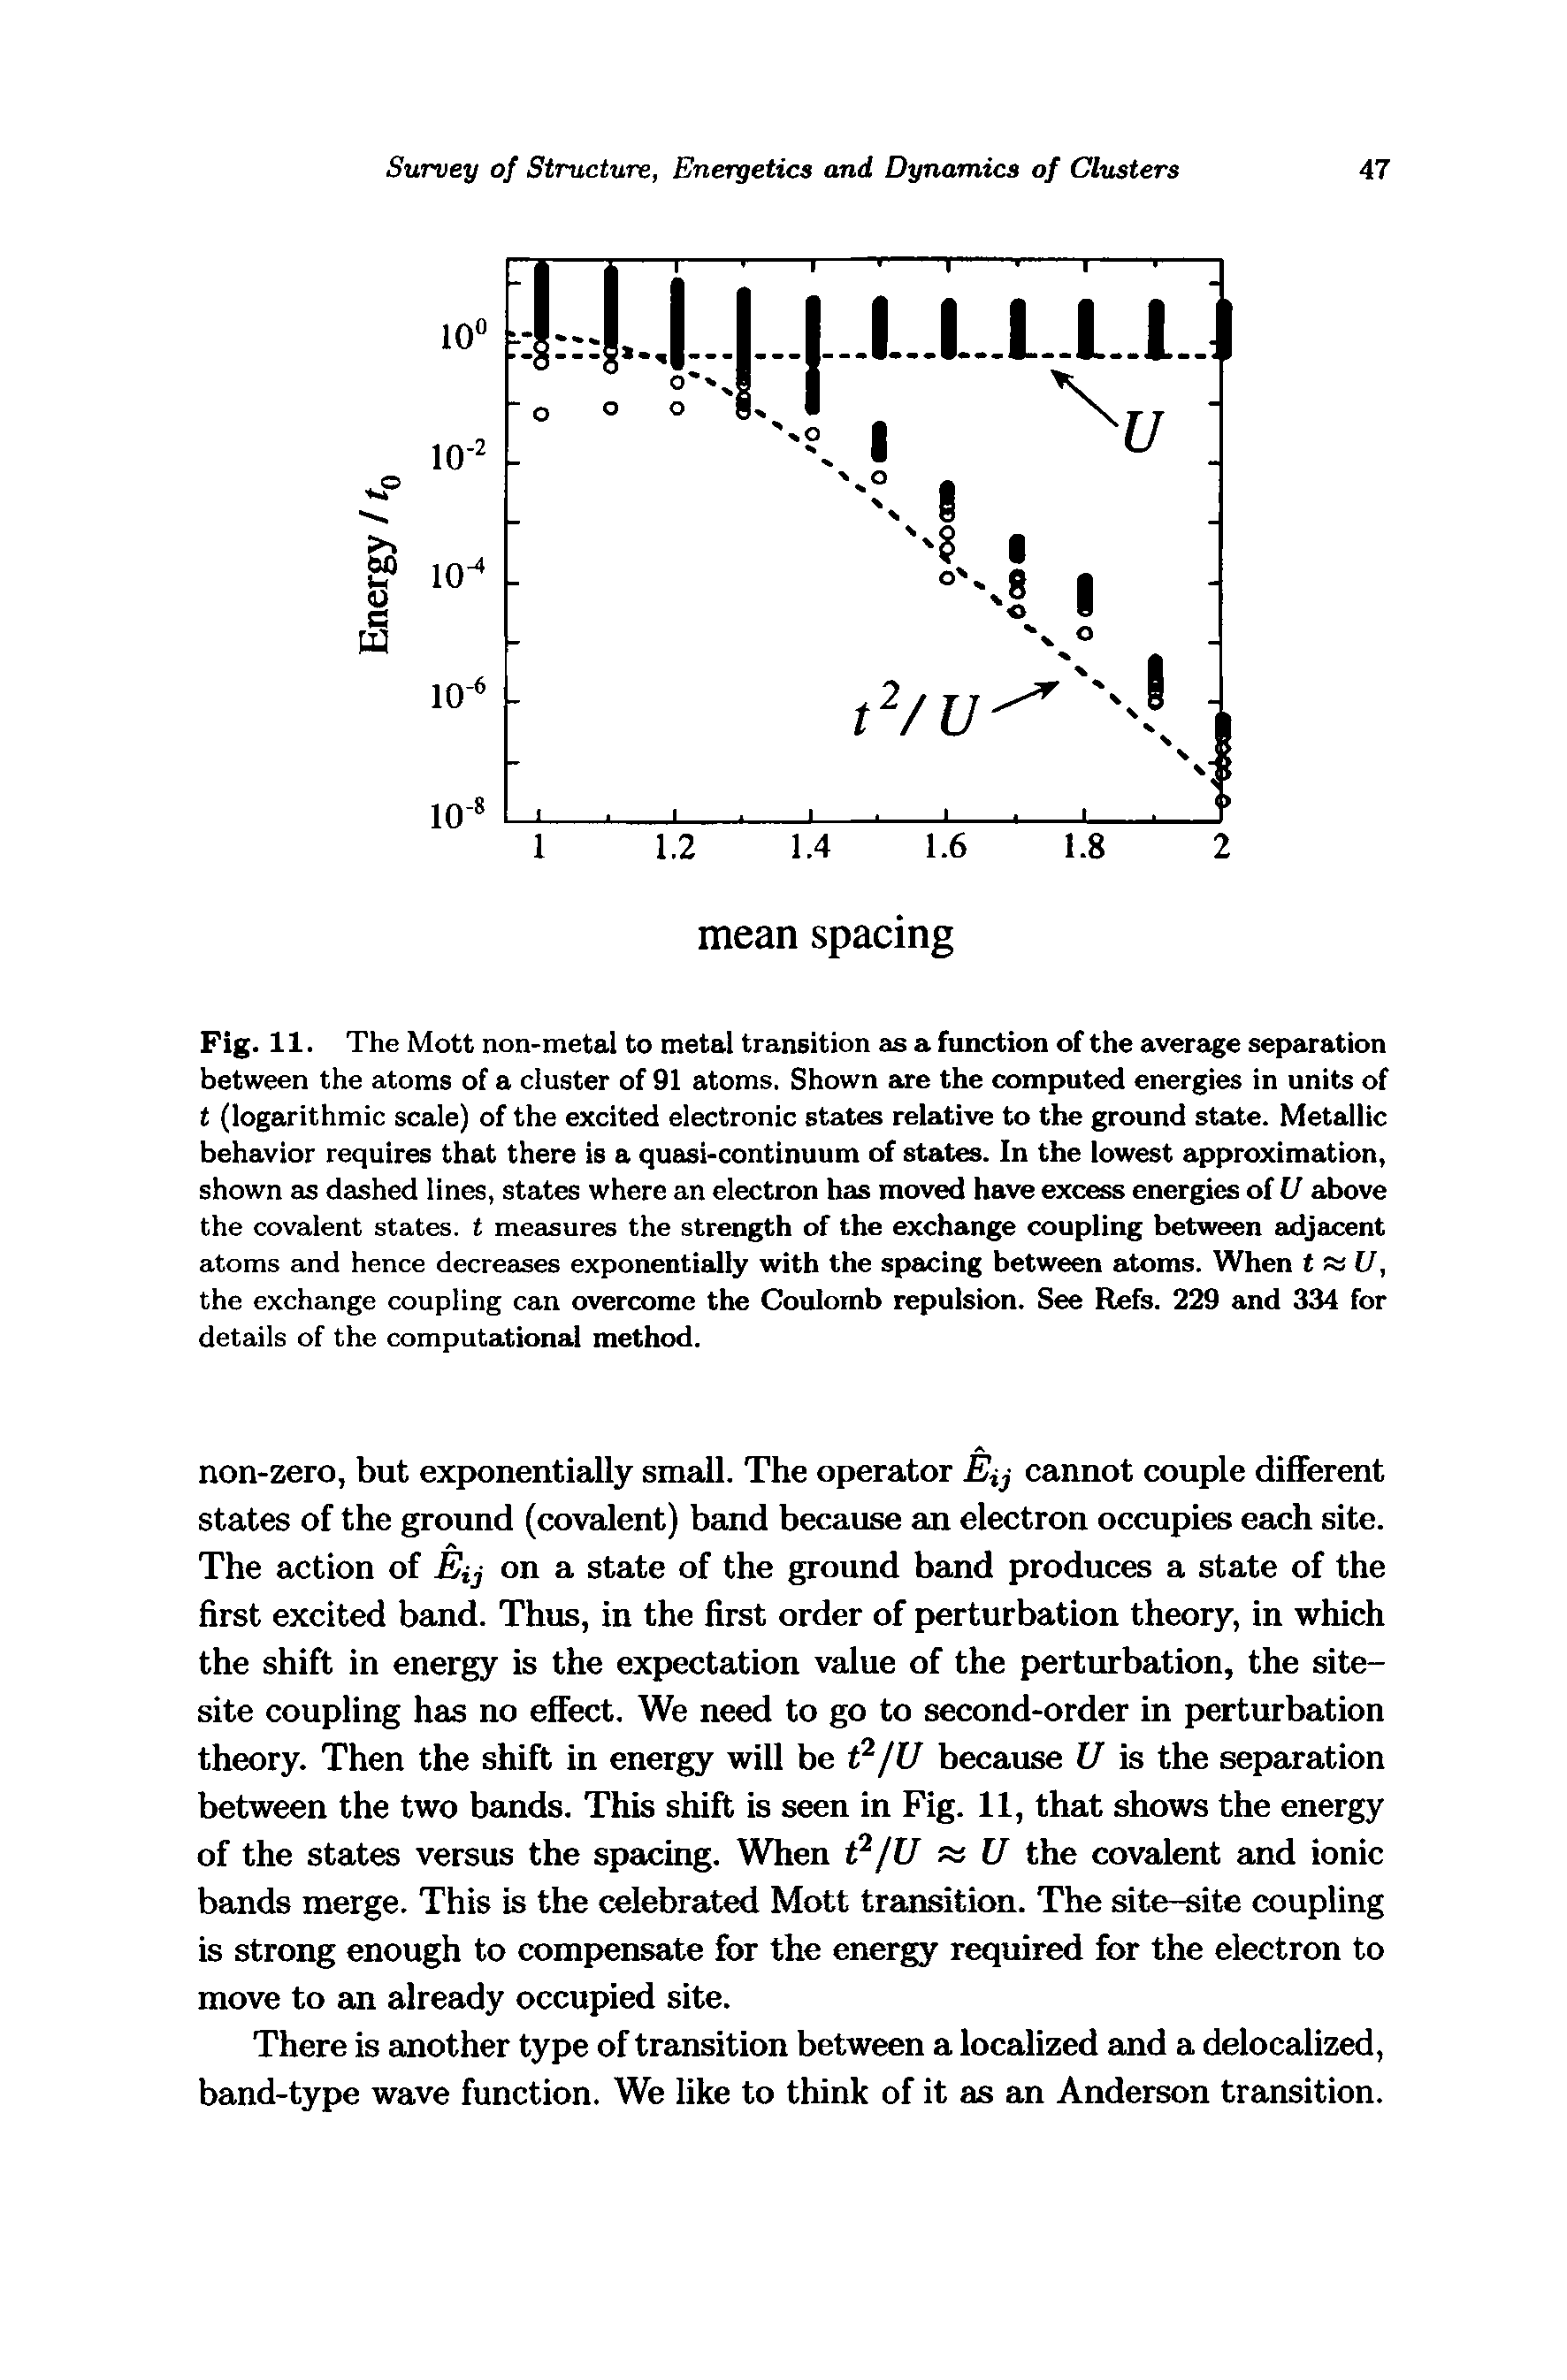 Fig. 11. The Mott non-metal to metal transition as a function of the average sei>aration between the atoms of a cluster of 91 atoms. Shown are the computed energies in units of t (logarithmic scale) of the excited electronic states relative to the ground state. Metallic behavior requires that there is a quasi-continuum of states. In the lowest approximation, shown as dashed lines, states where an electron has moved have excess energies of U above the covalent states, t measures the strength of the exchange coupling between adjacent atoms and hence decreases exponentially with the spacing between atoms. When tsiU, the exchange coupling can overcome the Coulomb repulsion. See Refs. 229 and 334 for details of the computational method.